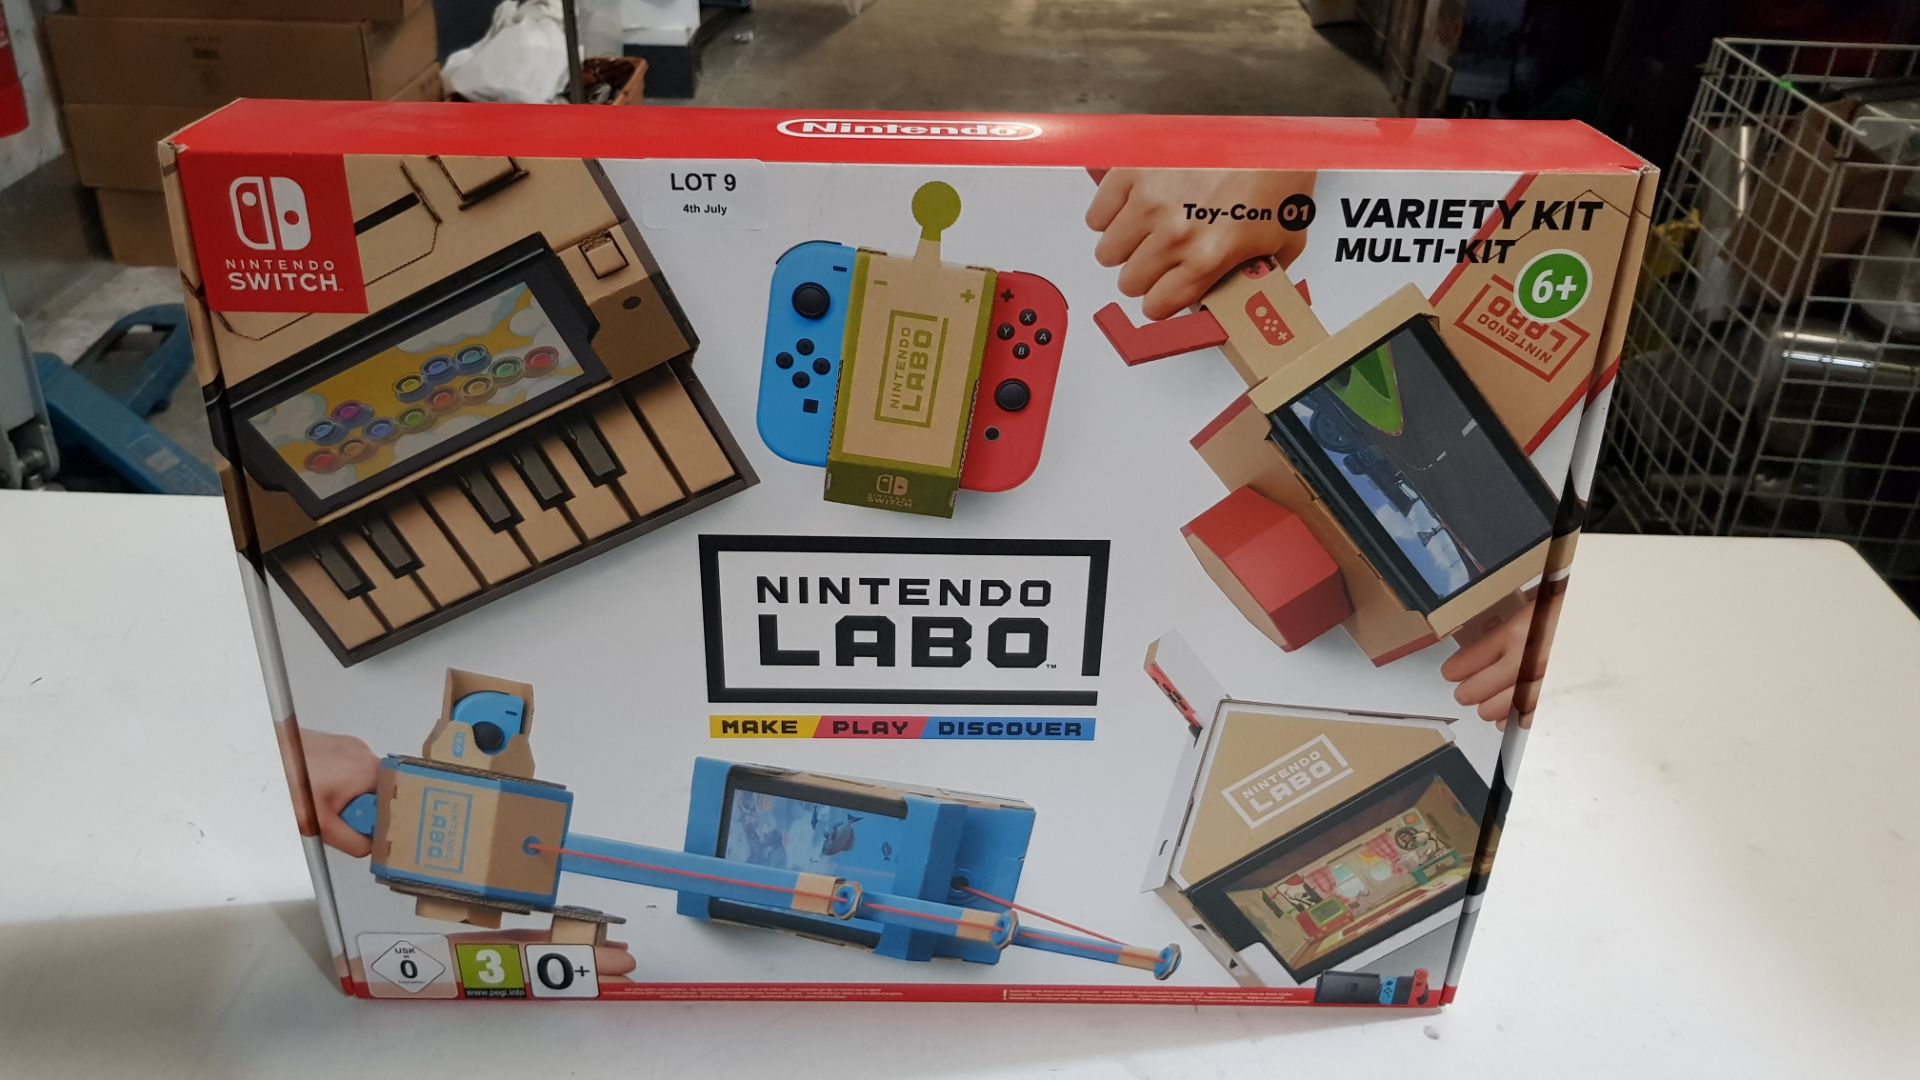 1x Nintendo Switch Labo. Toy Con 01 Variety Kit Multi Kit RRP £69.99. New, Sealed Unit. Opened Fo - Image 2 of 4